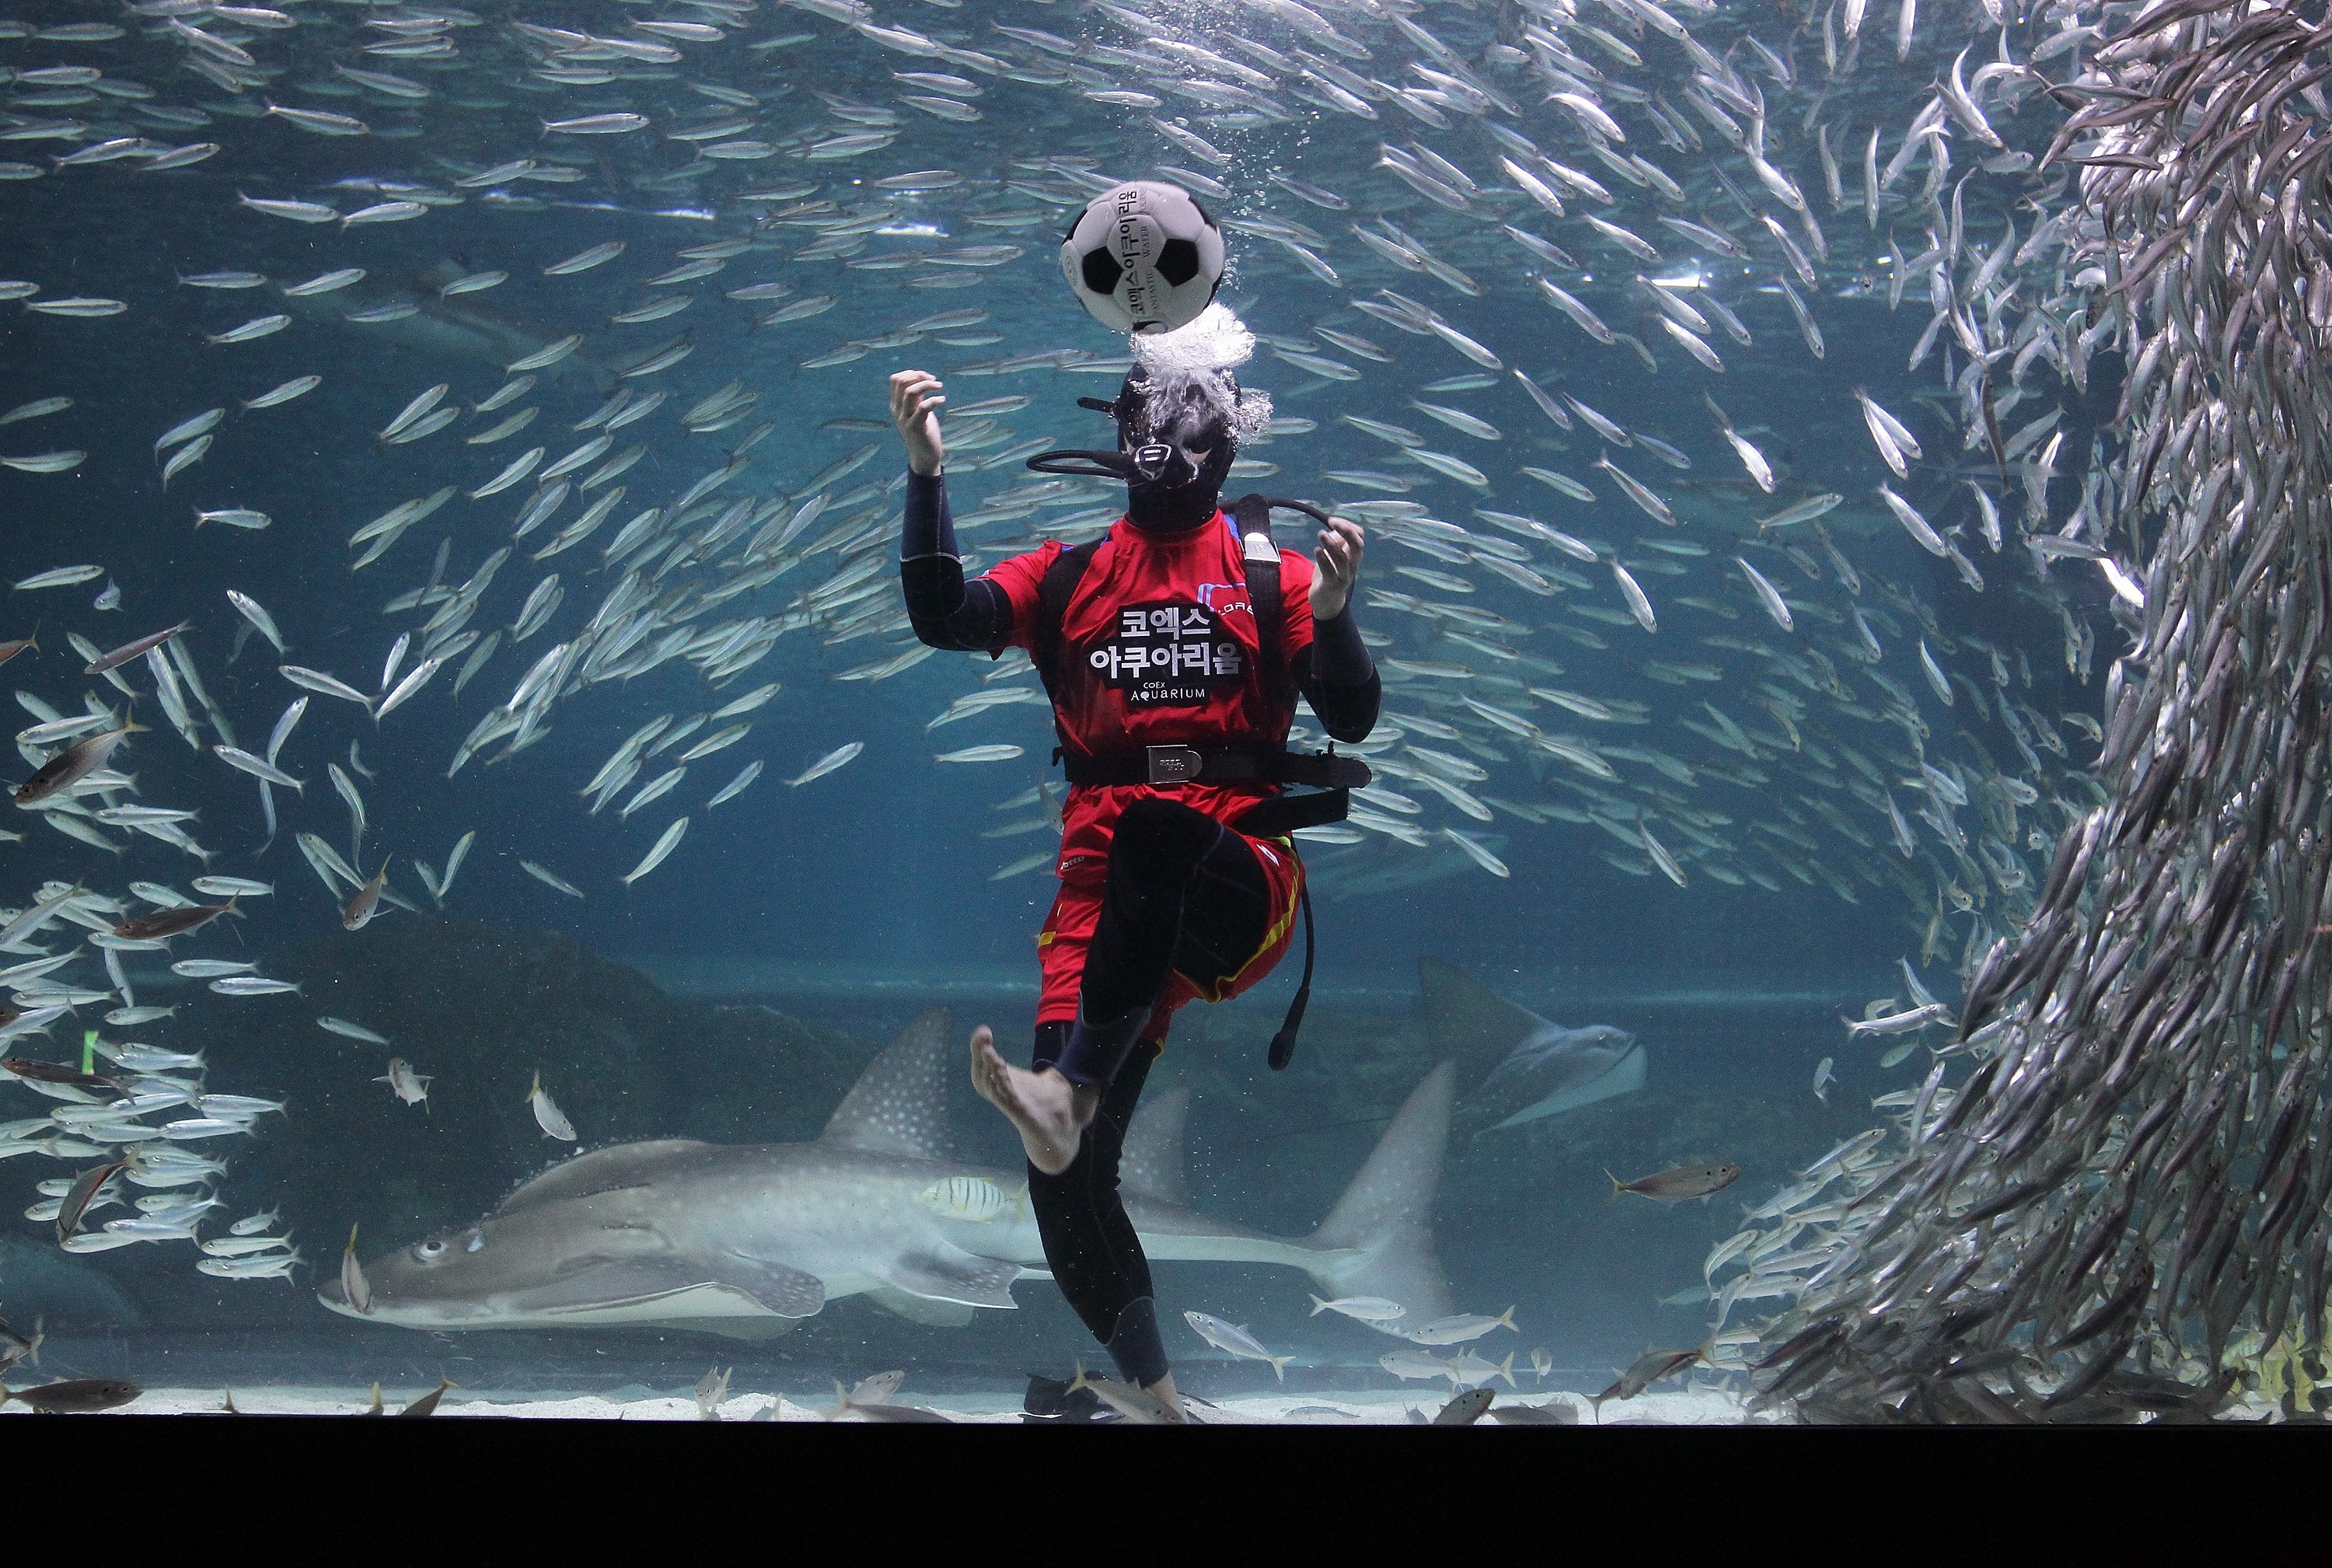 A South Korean diver clad in a soccer uniform swims with sardines at the Coex Aquarium on June 9, 2014 in Seoul.